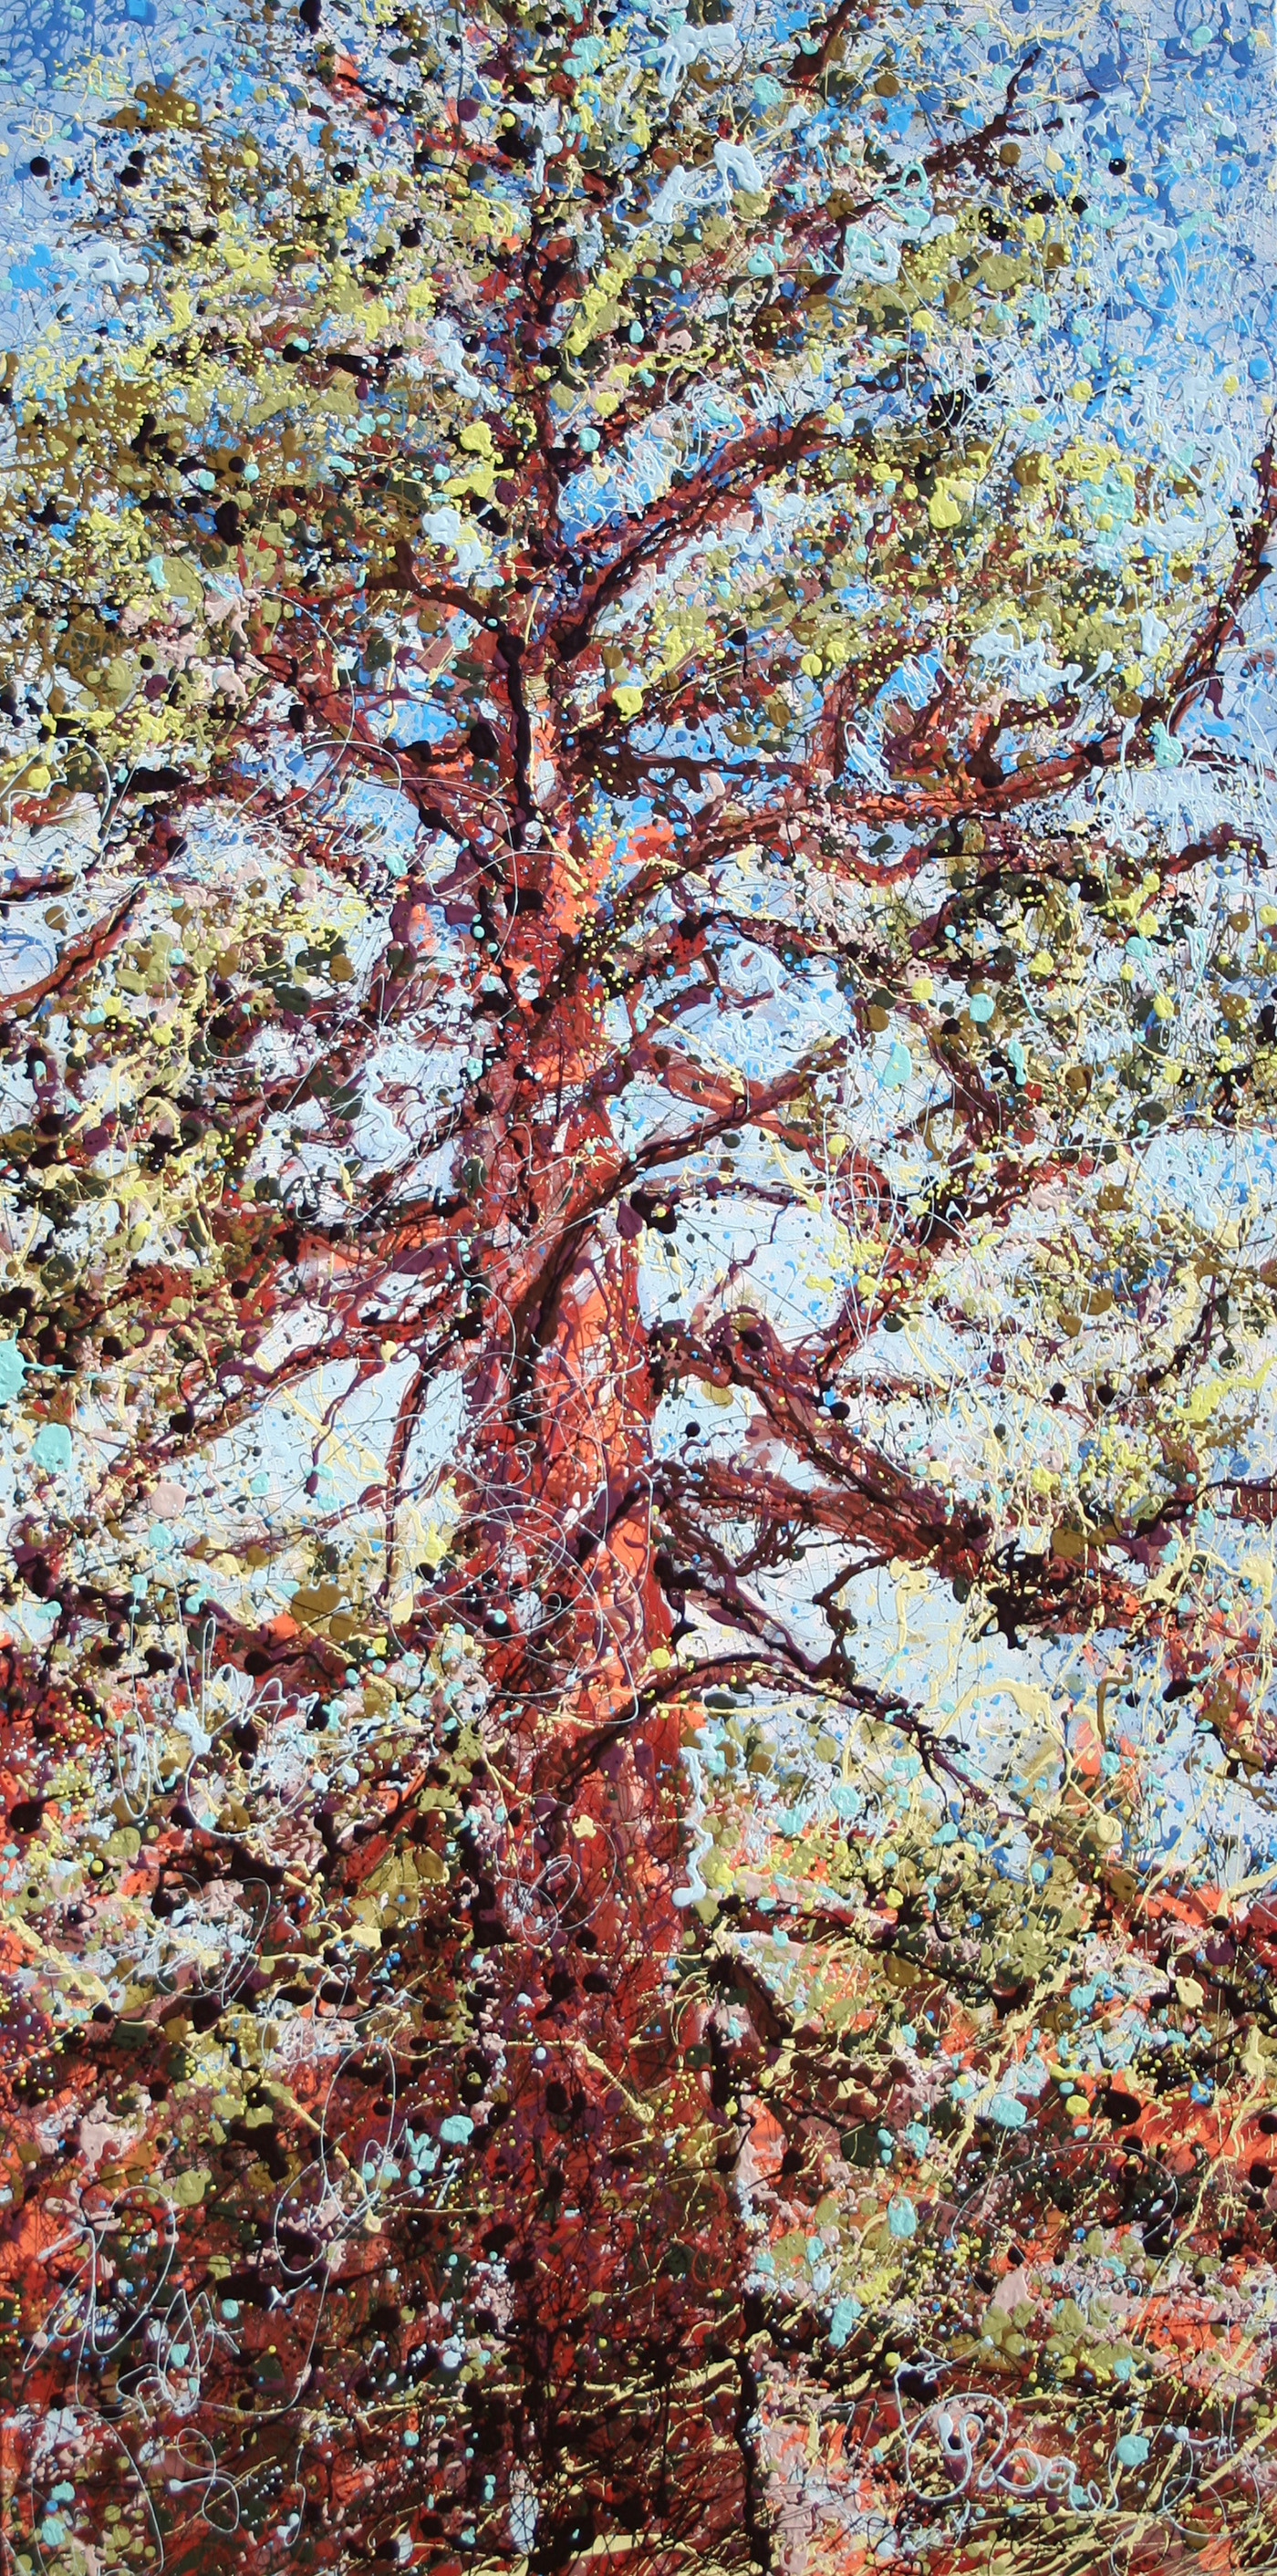 Ponderosa Latex Enamel Painting on Gallery Wrapped Canvas by Fort Collins, Colorado Artist Lisa Cameron Russell